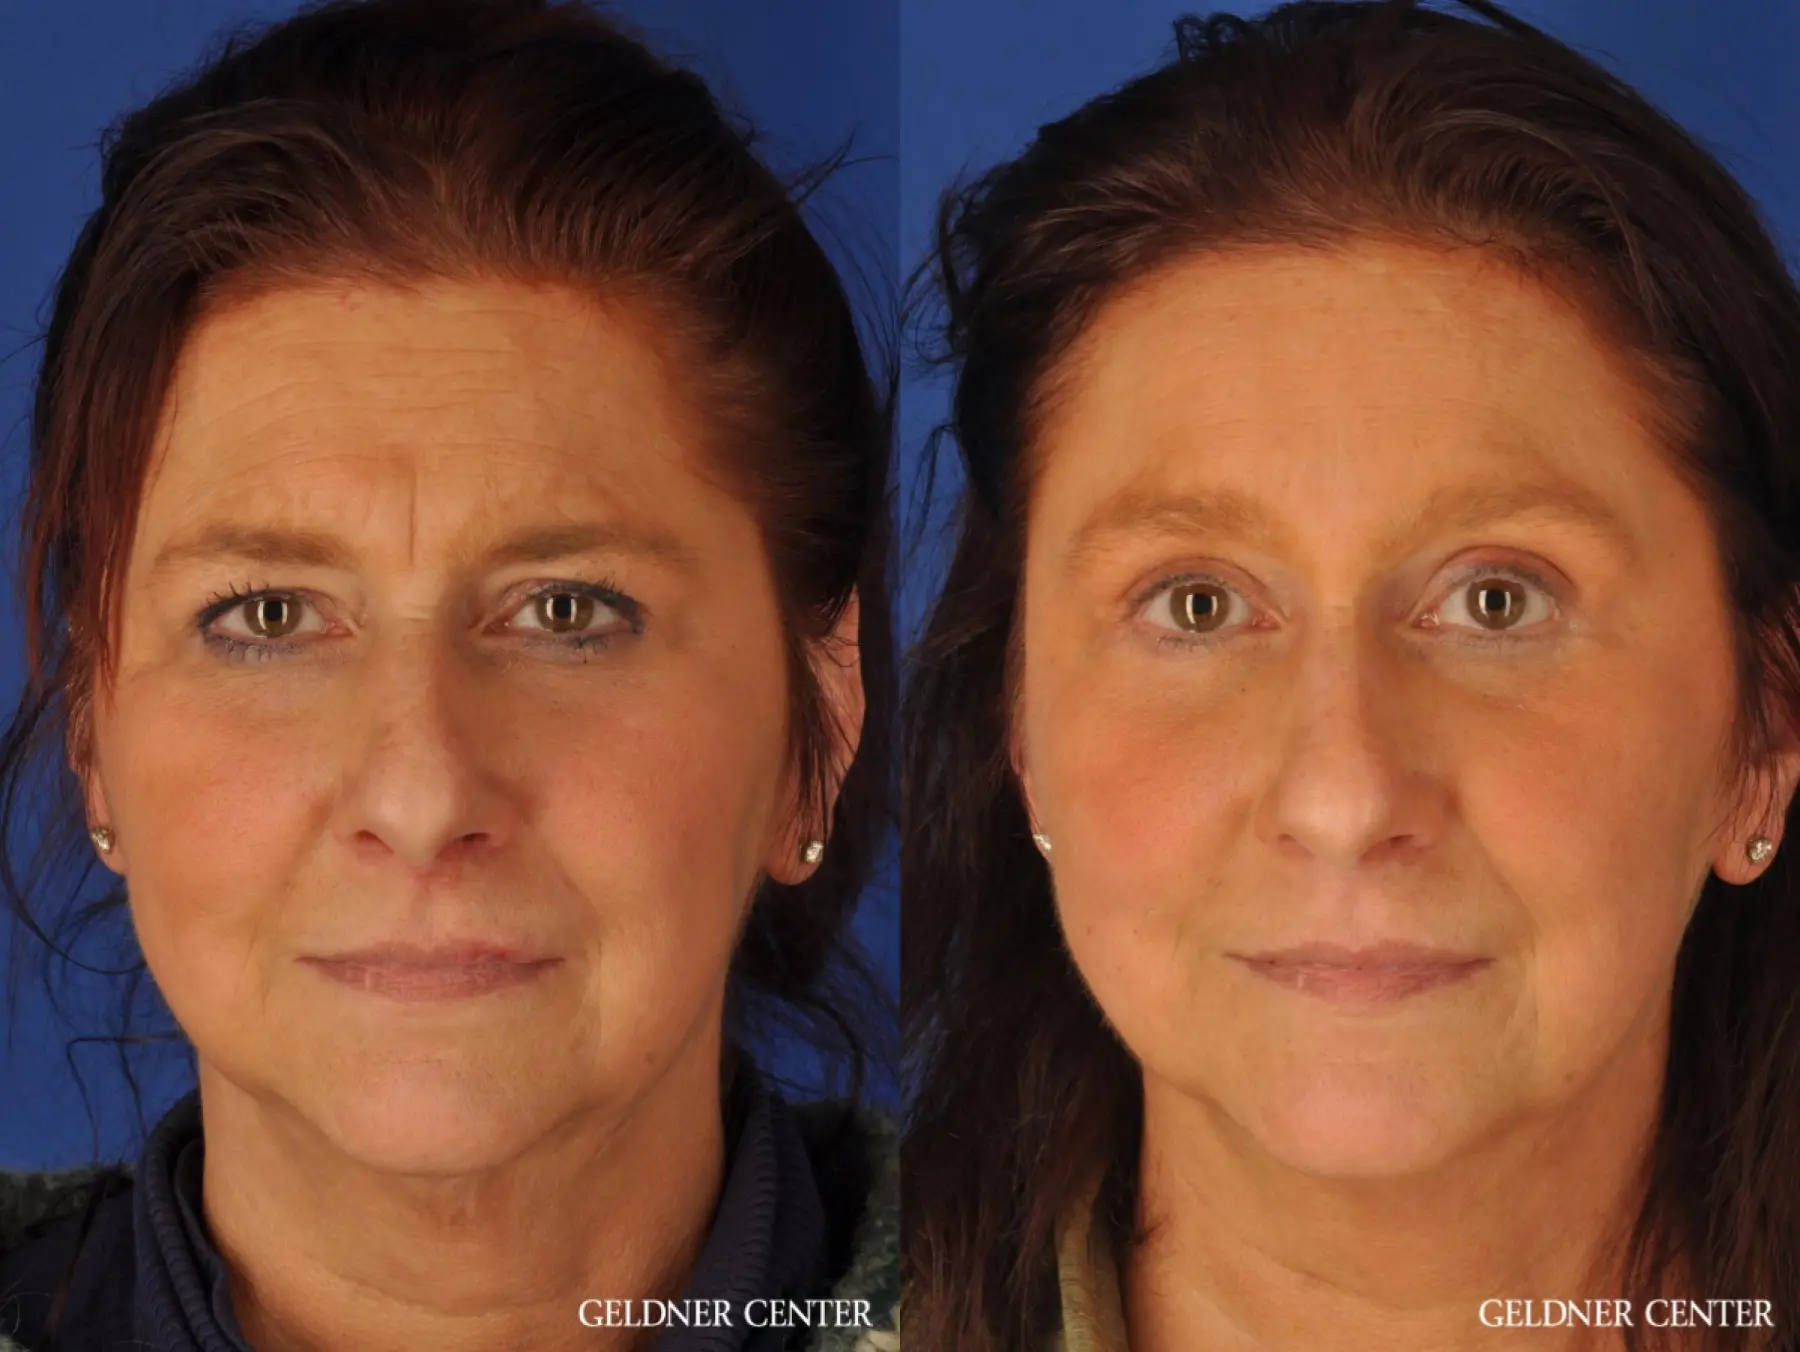 Woman Over 45, 185llbs or more, 5'4" to 5'7", endoscopic brow lift - Before and After